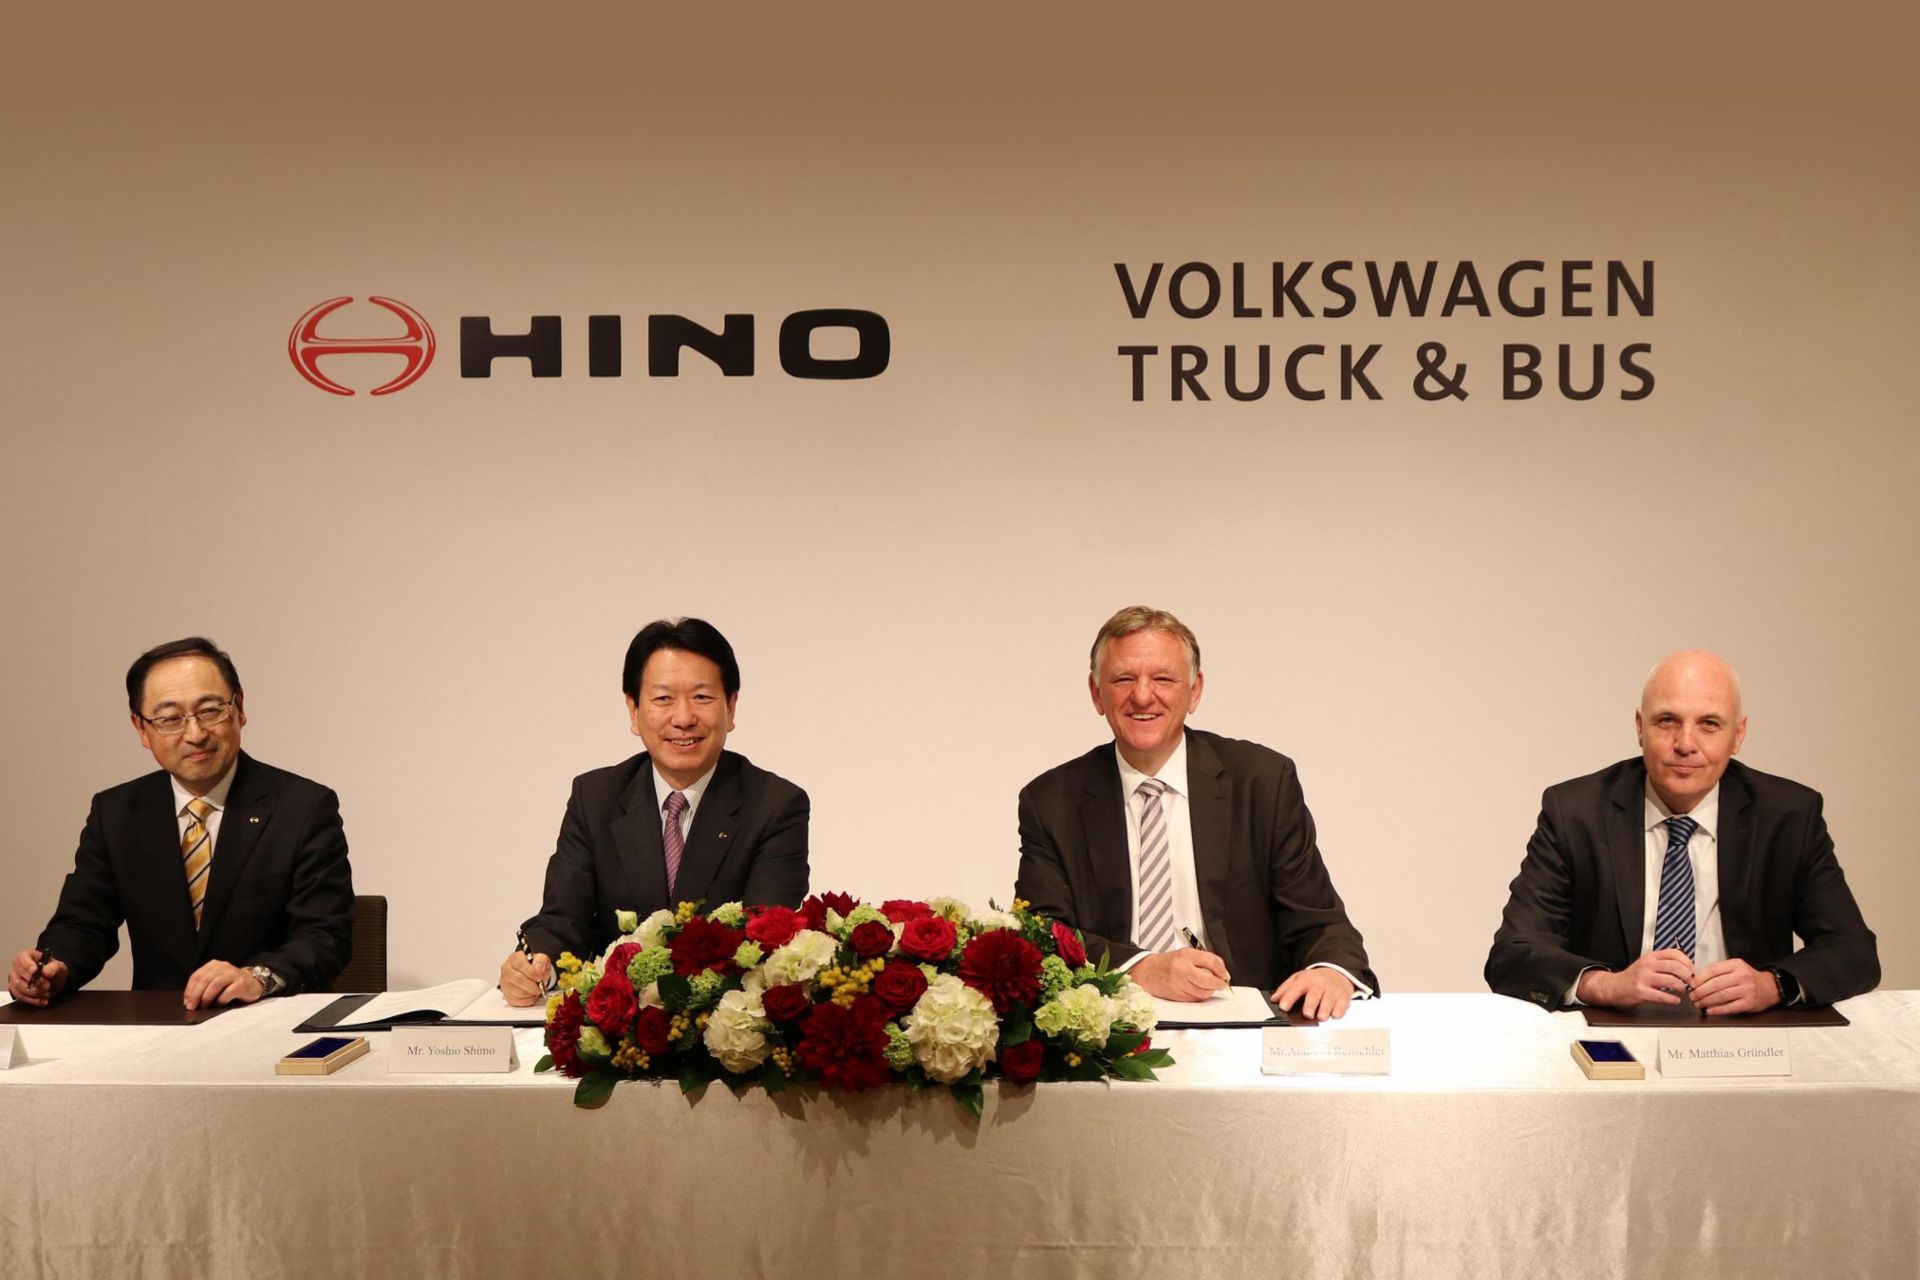 (from left) Taketo Nakane, Director and Senior Managing Officer of Hino Motors, Yoshio Shimo, President & CEO of Hino Motors, Andreas Renschler, Member of the Board of Management of Volkswagen AG and CEO of TRATON, Matthias Gründler, CFO of TRATON
                 